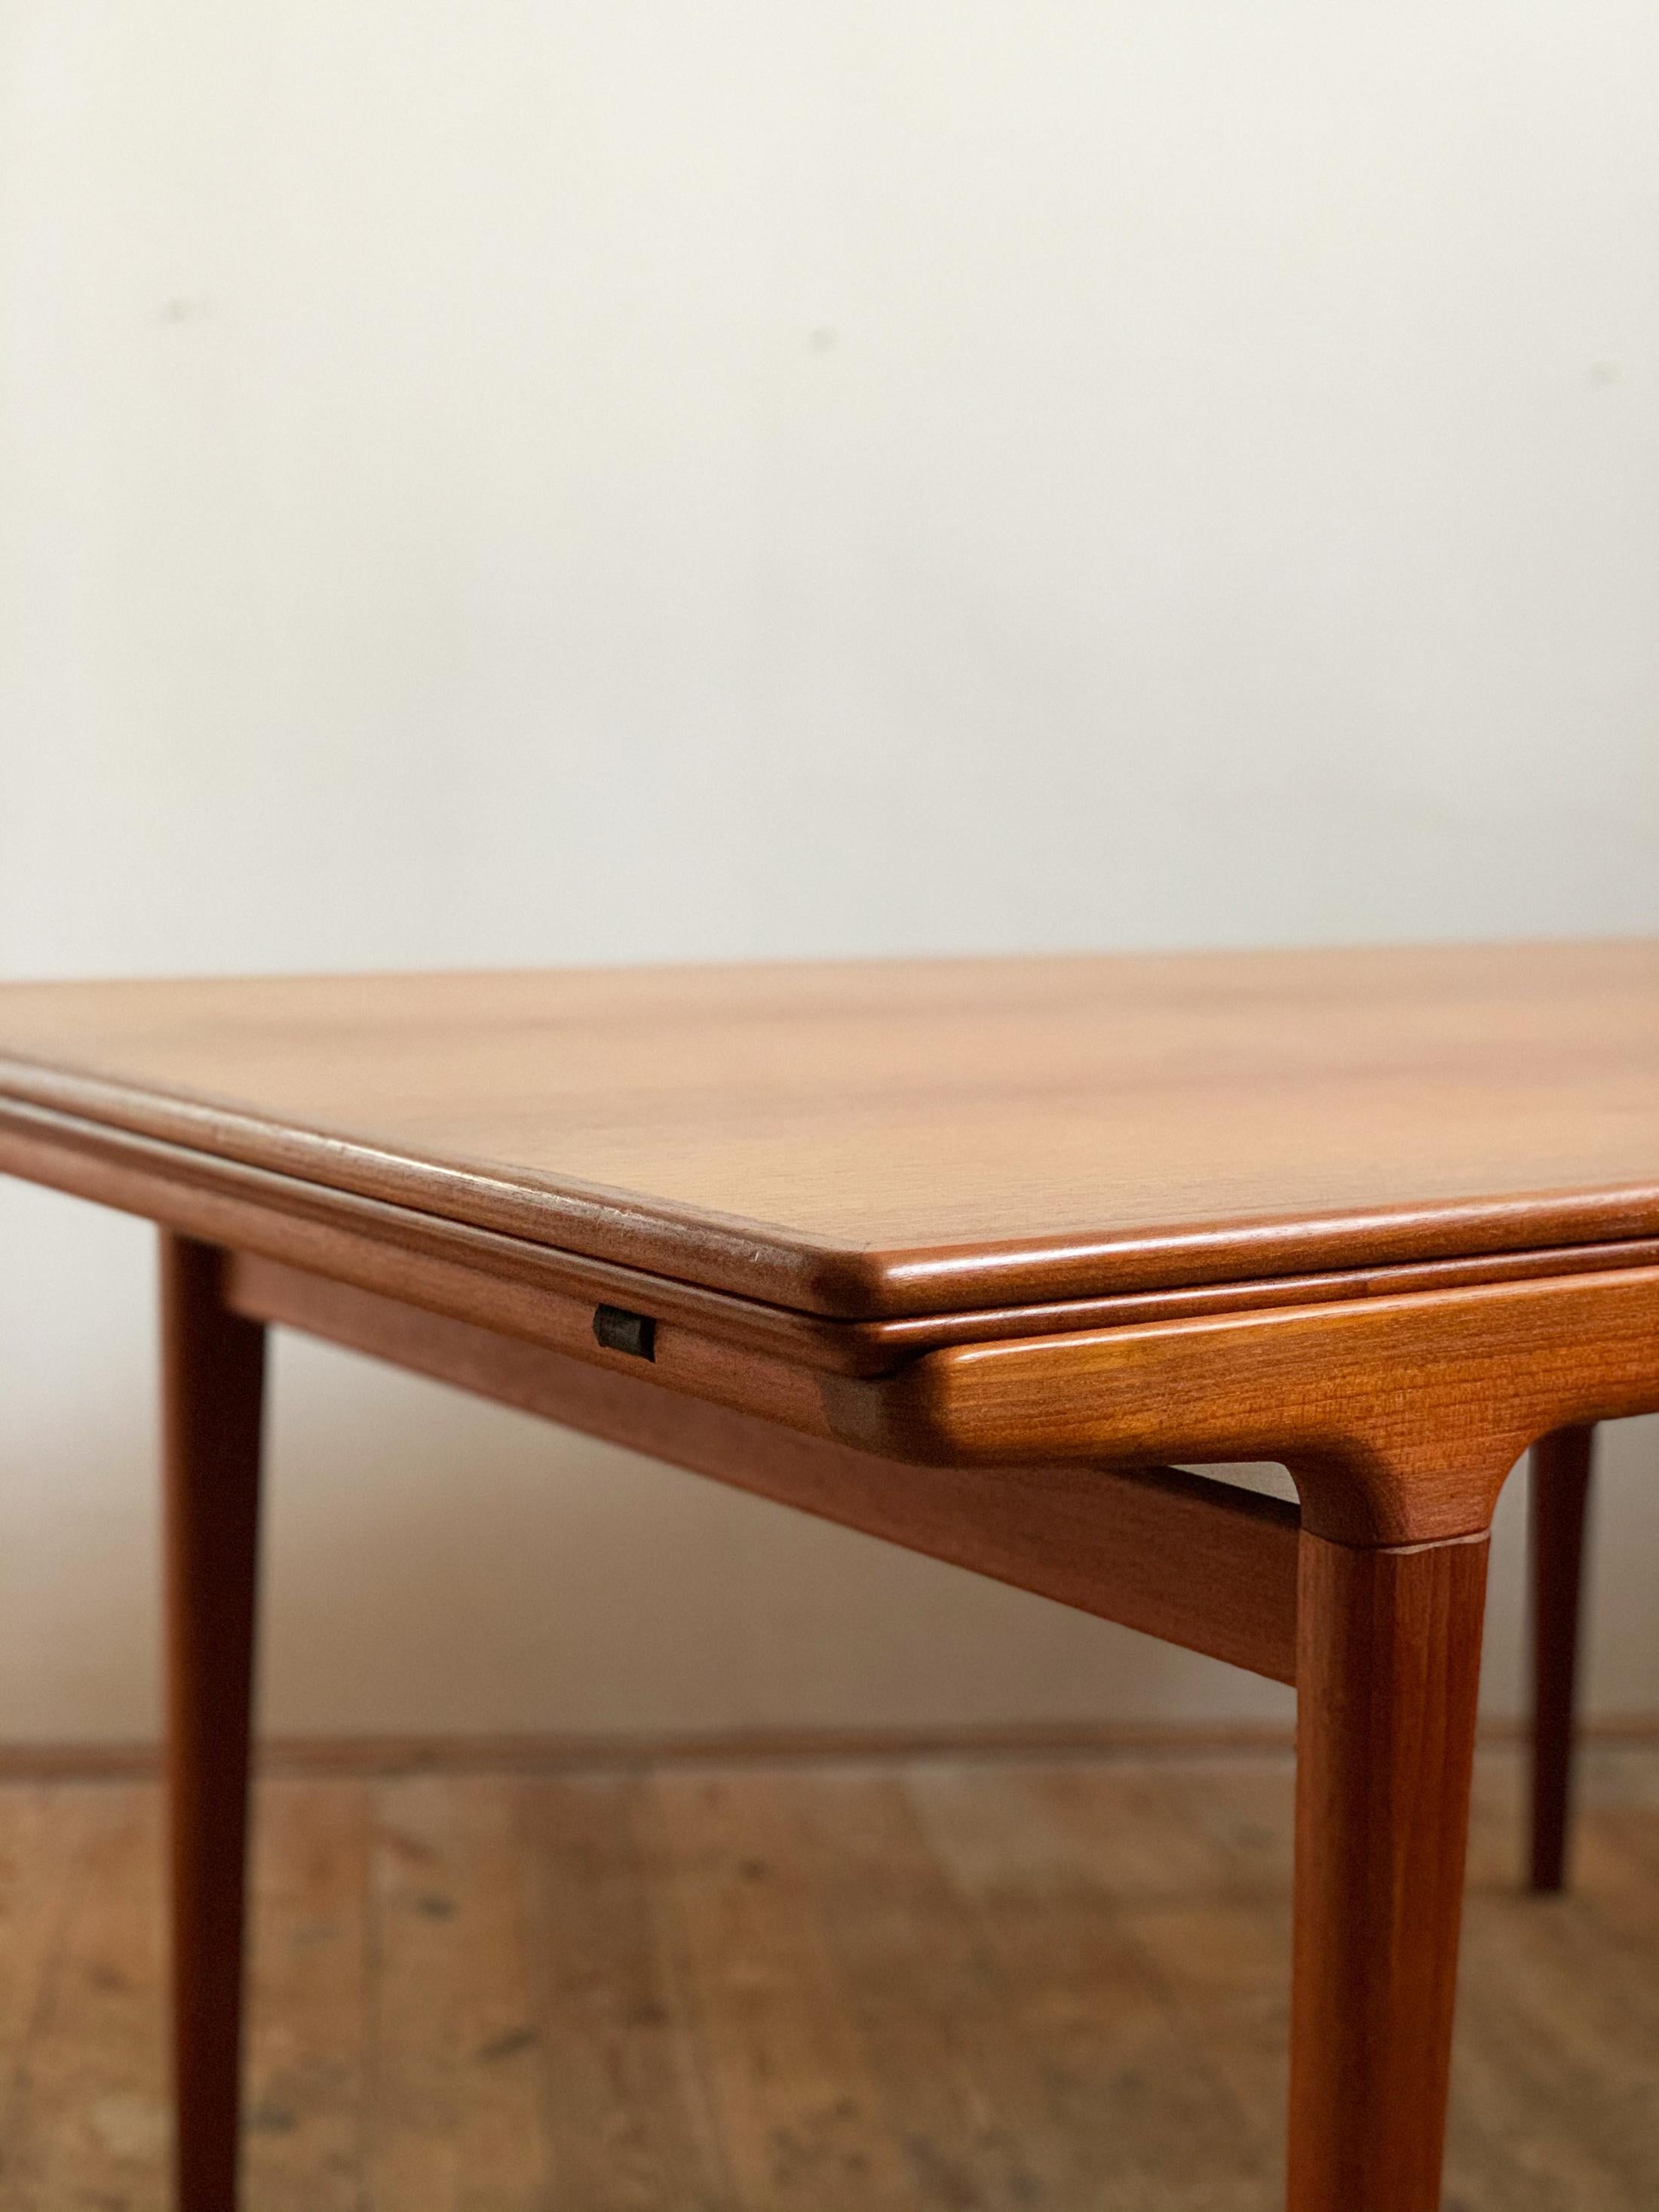 Mid-20th Century Extendable Midcentury Teak Dining Table by Johannes Andersen for Uldum For Sale